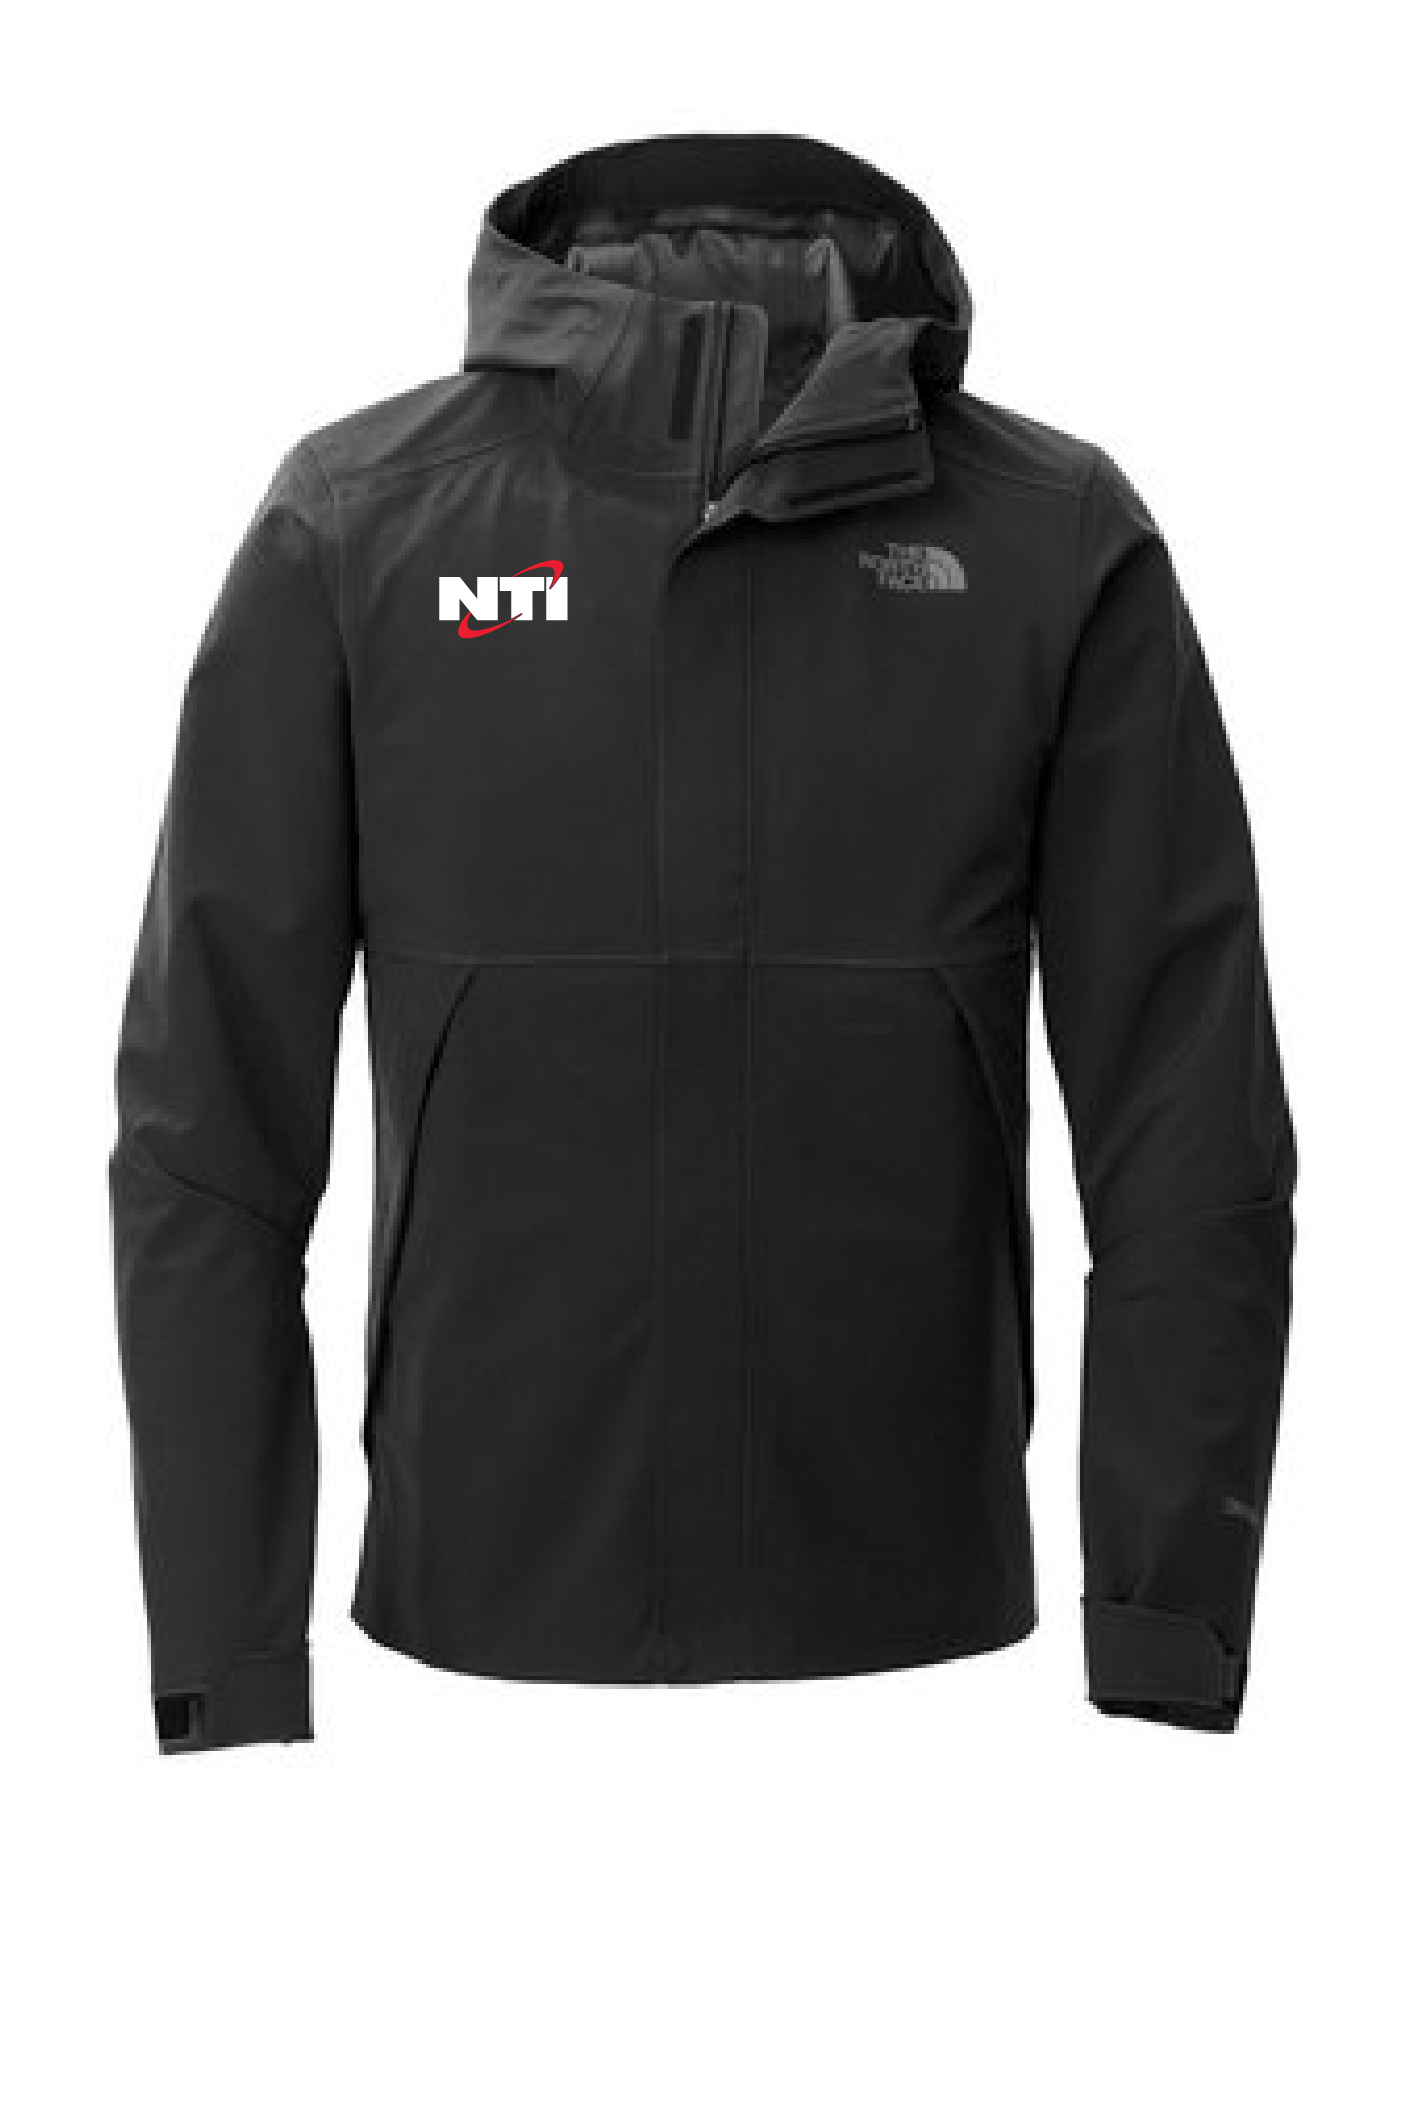 The North Face ® Apex DryVent ™ Jacket - NTI Promotions